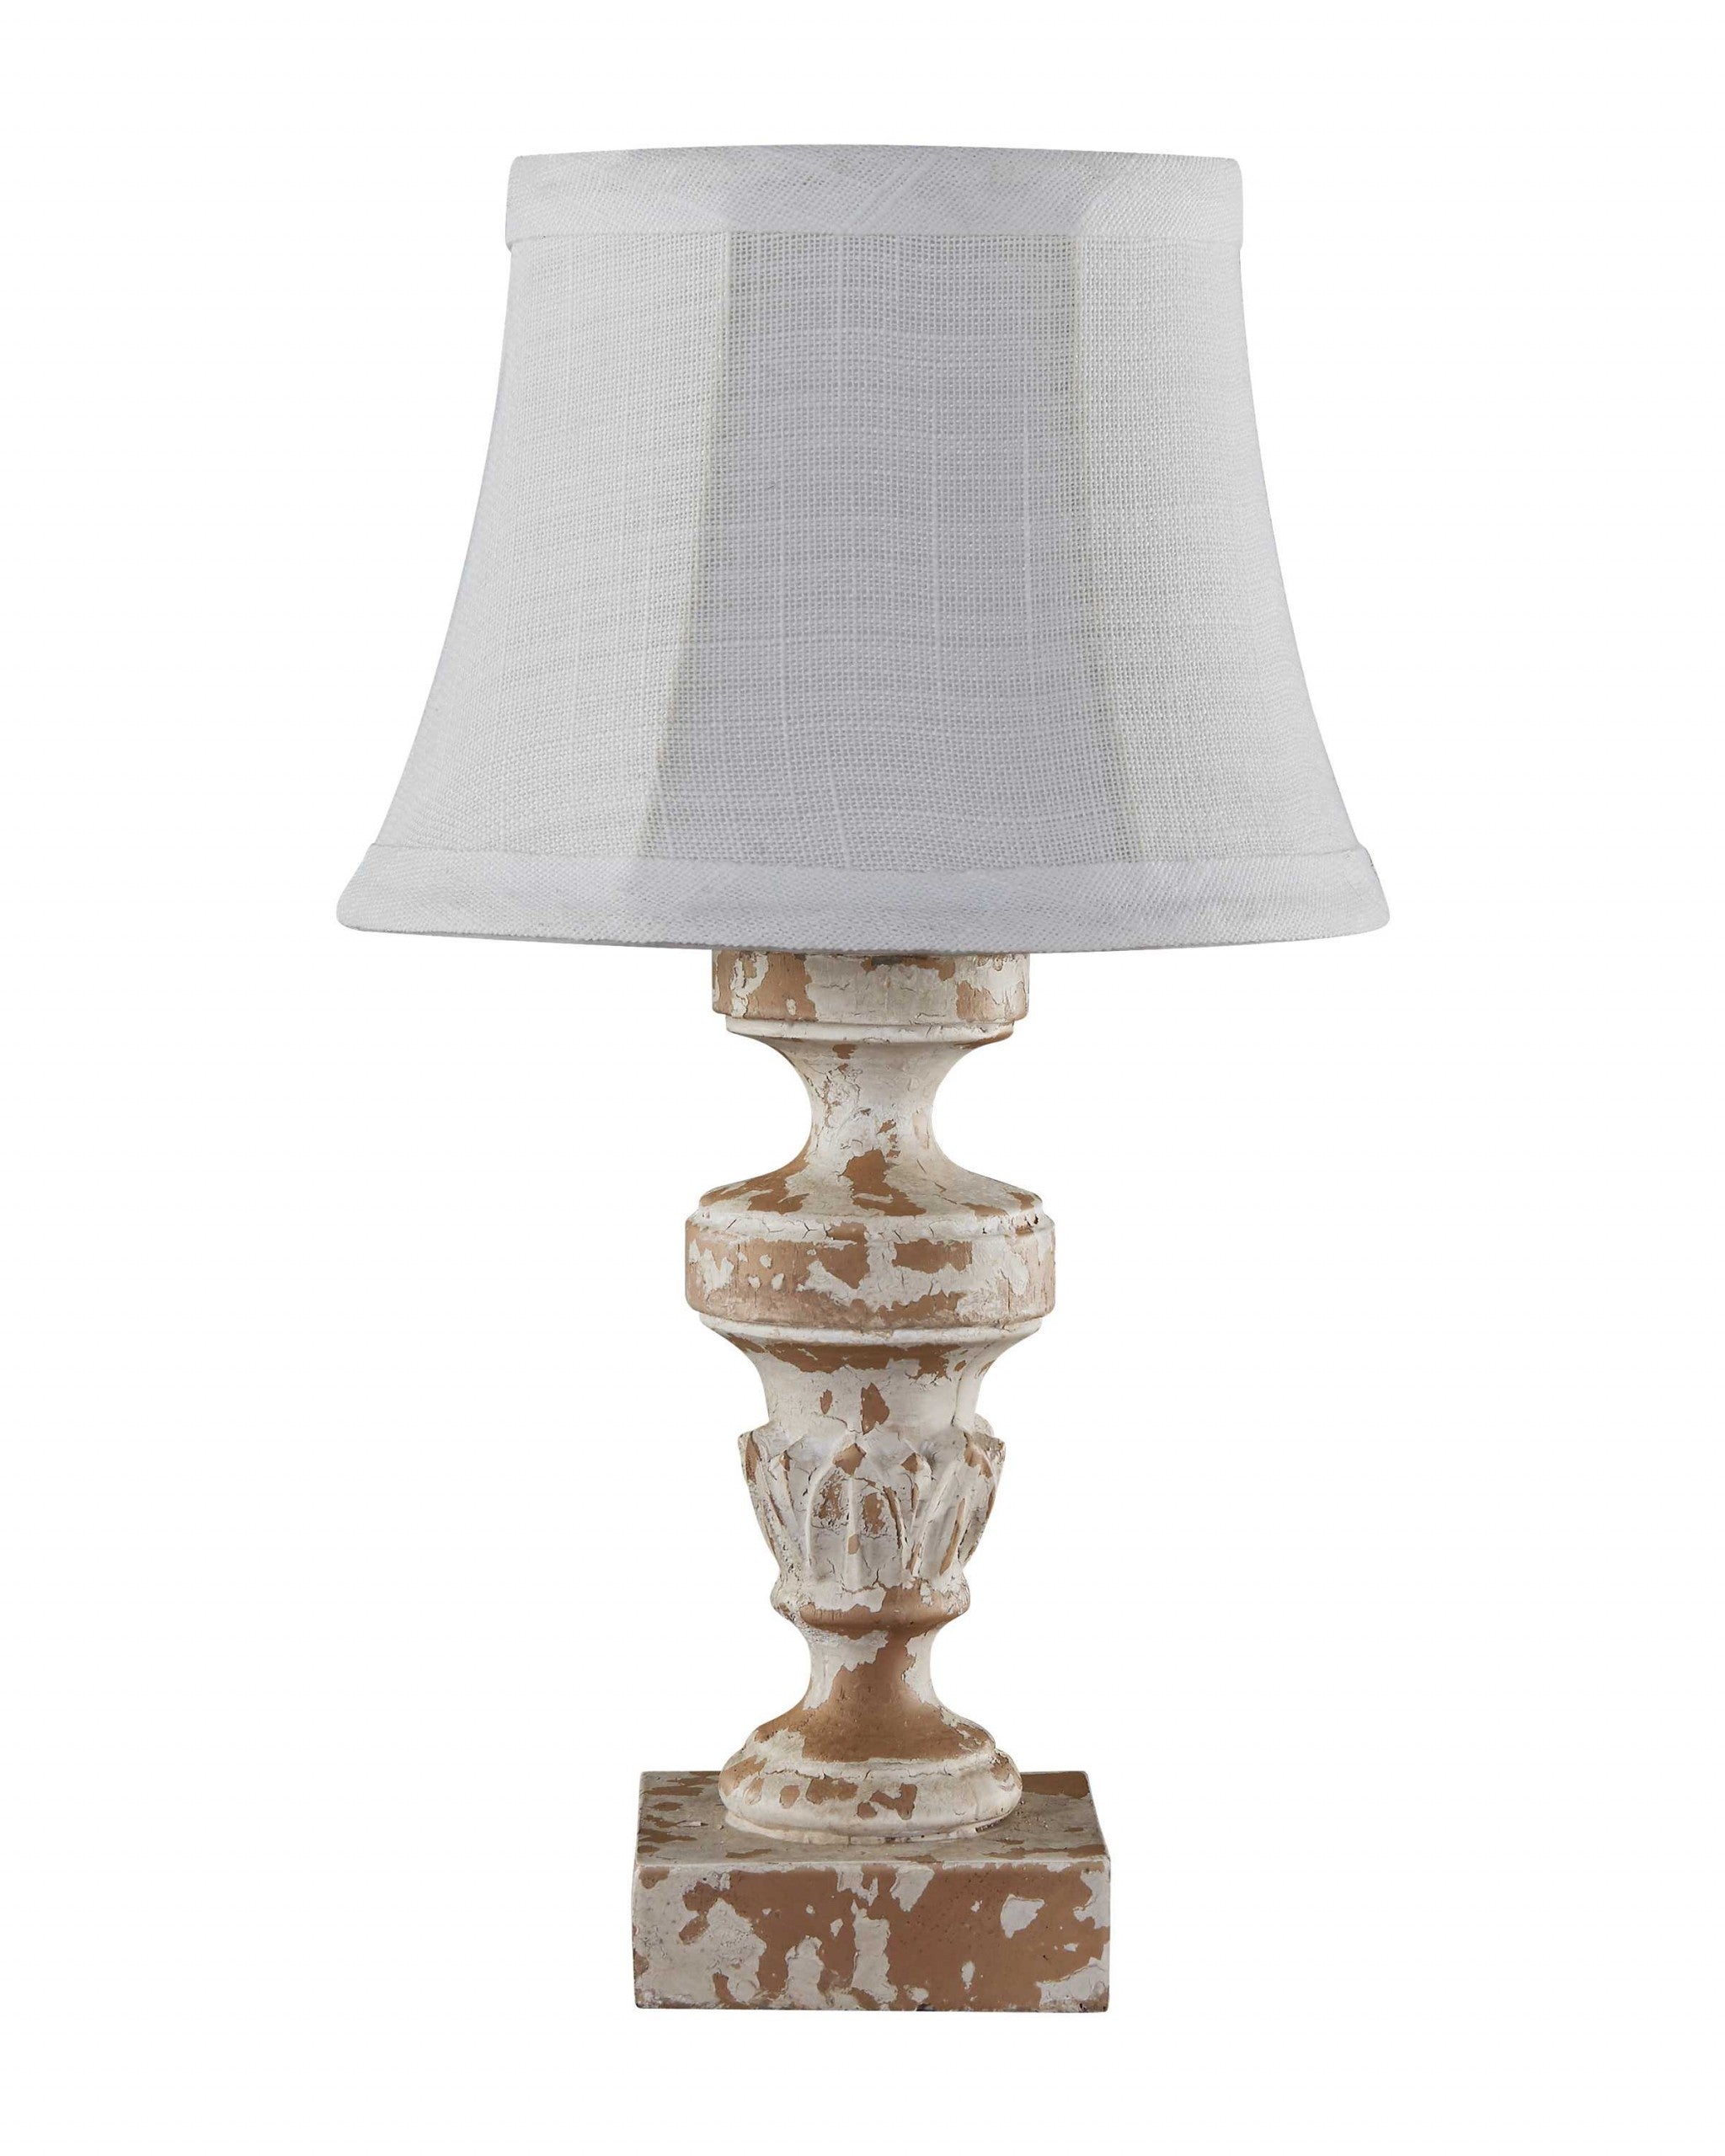 14" White Table Lamp With White Bell Shade